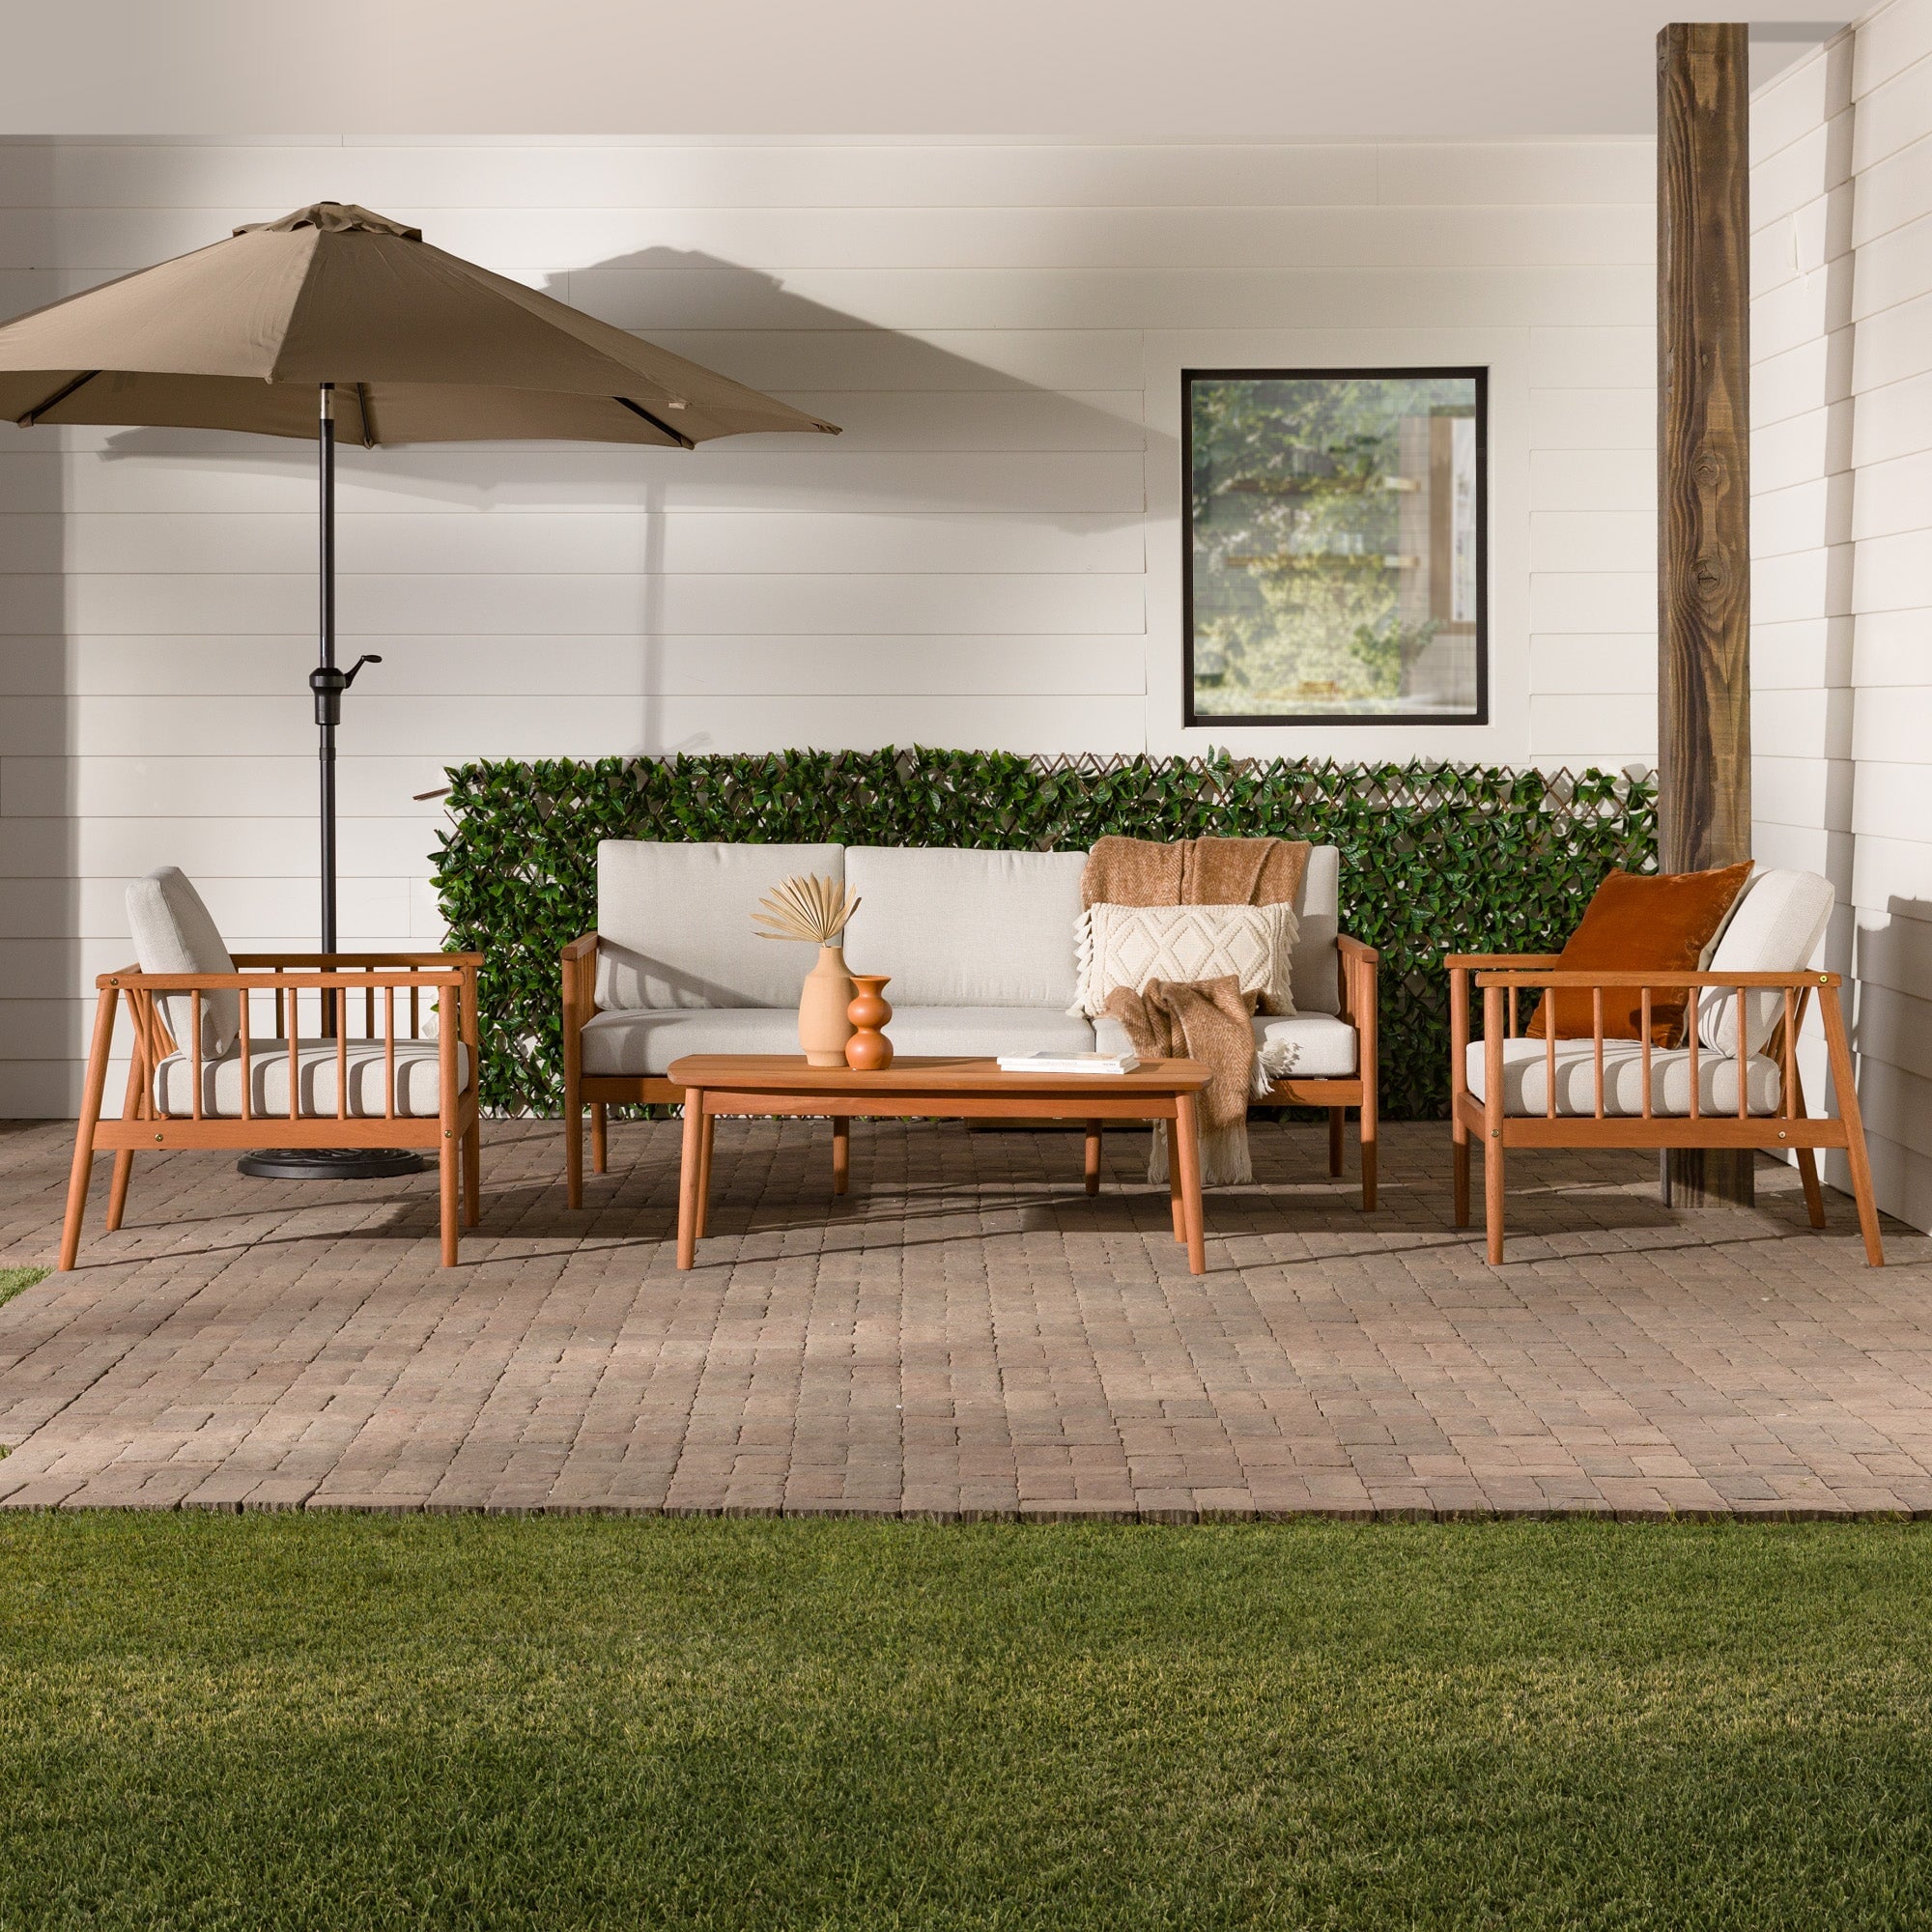 Walker Edison Circa Modern 4-Piece Solid Wood Spindle Patio Chat Set